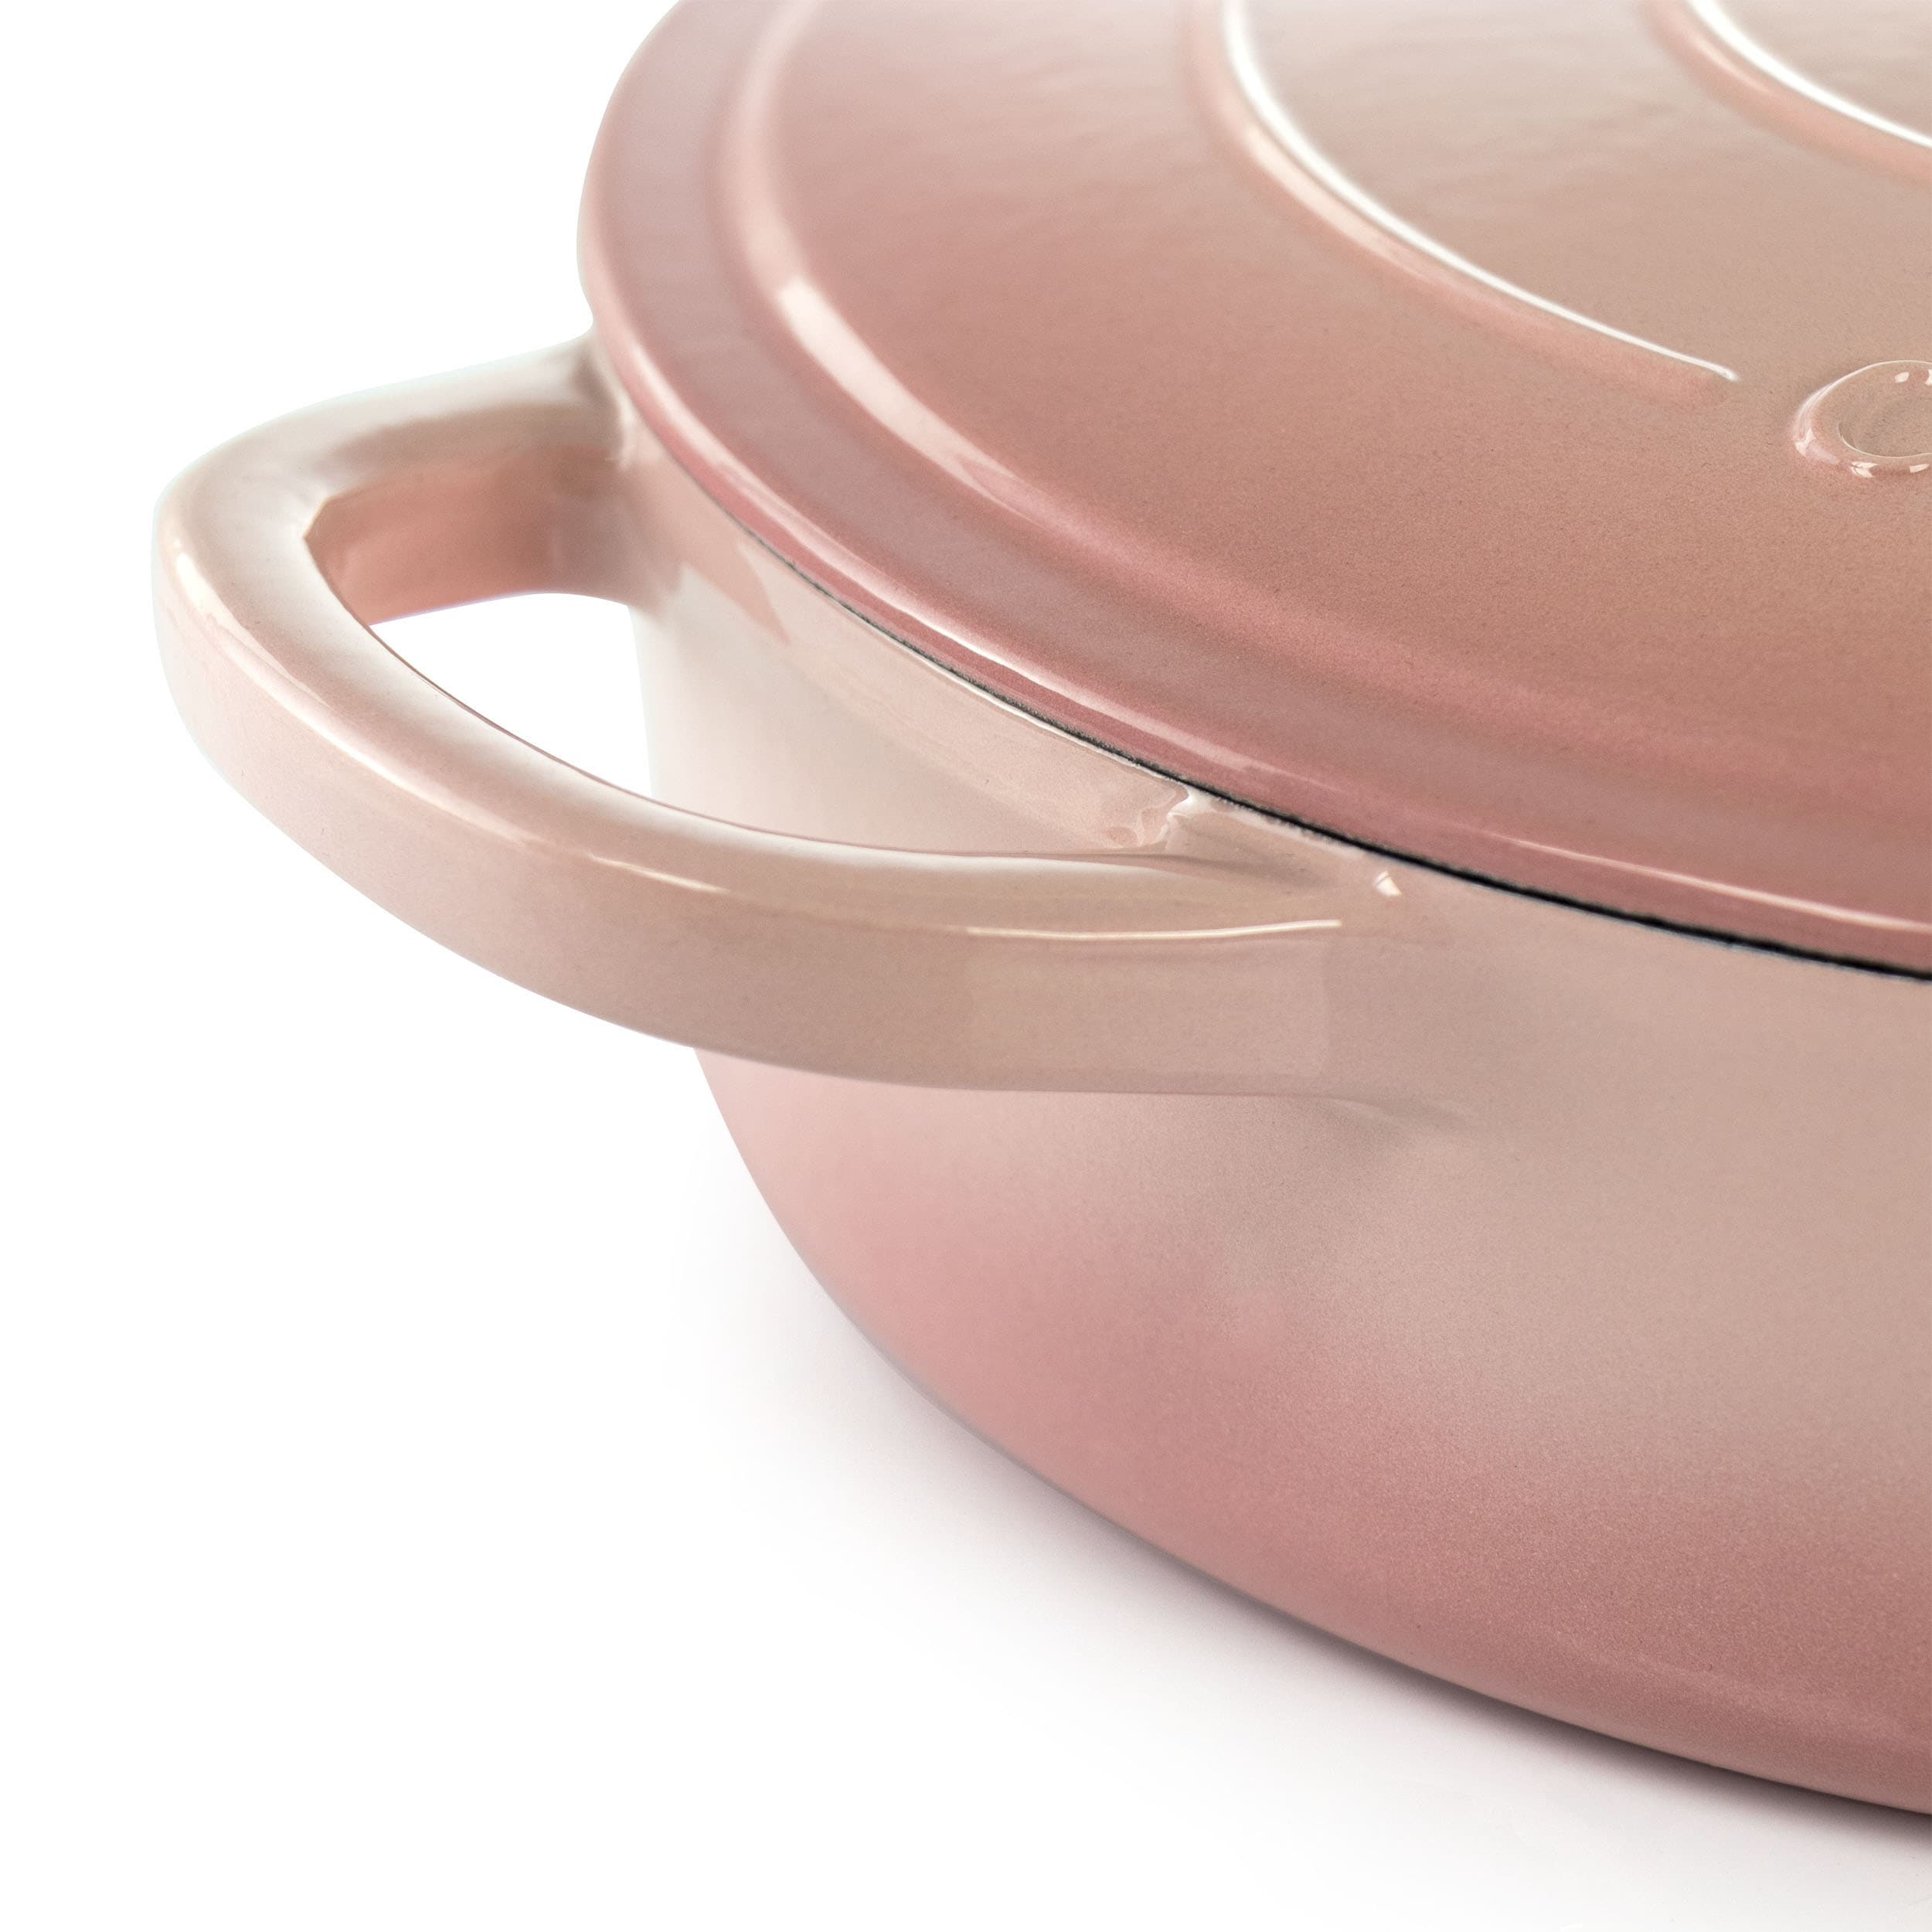 https://ak1.ostkcdn.com/images/products/is/images/direct/cc5a8e3fc8a422bb27d9ee4c0db0af124d4924c9/Crock-Pot-Artisan-5Qt-Enameled-Cast-Iron-Braiser-Pan-in-Blush-Pink.jpg